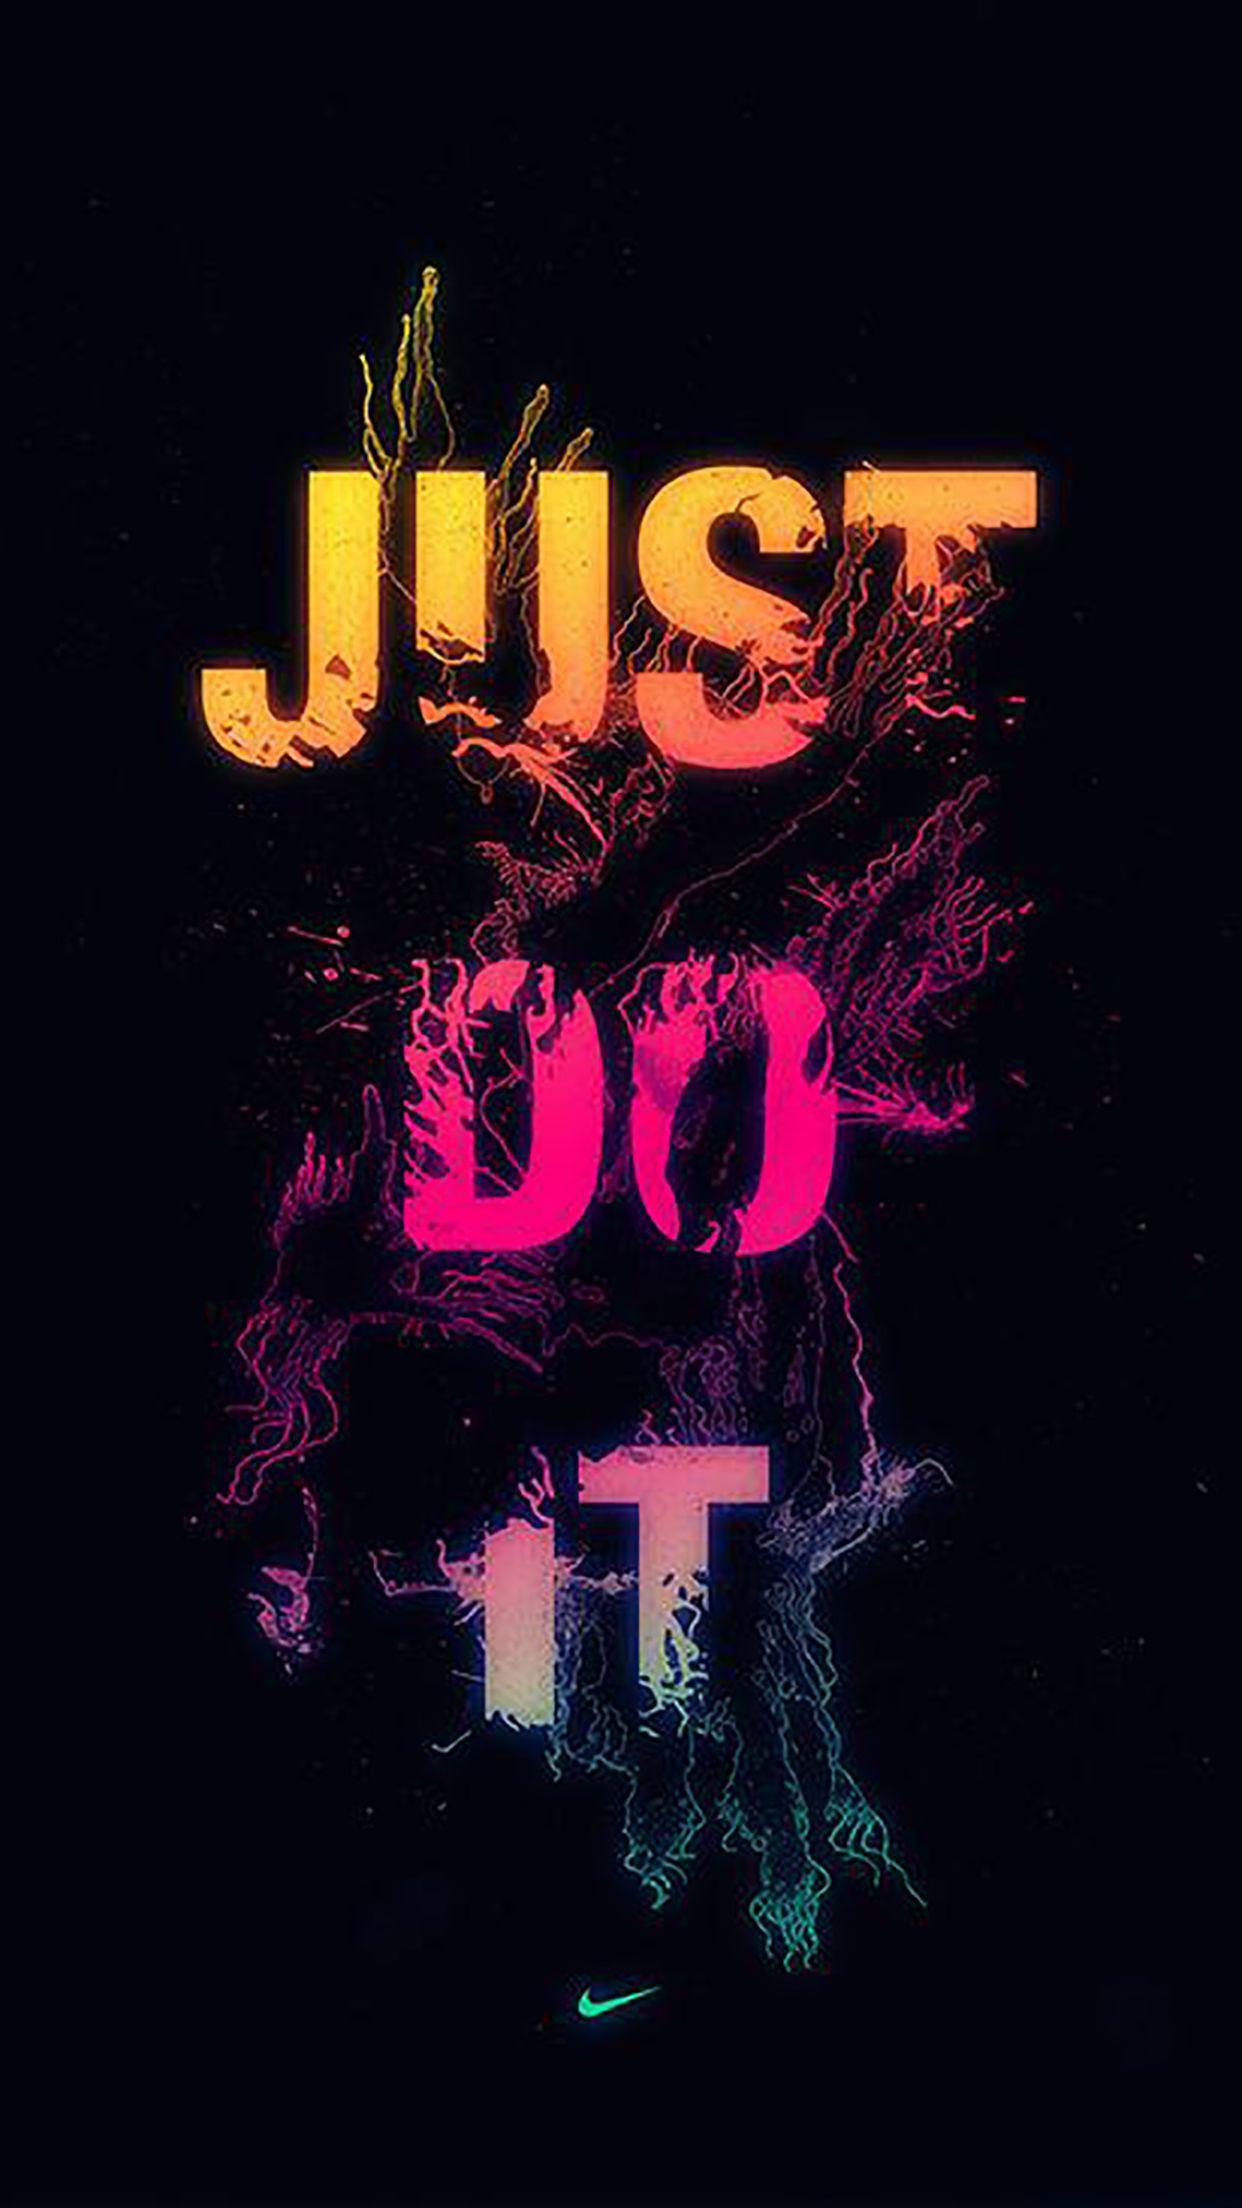 Just Do It Iphone Wallpapers Top Free Just Do It Iphone